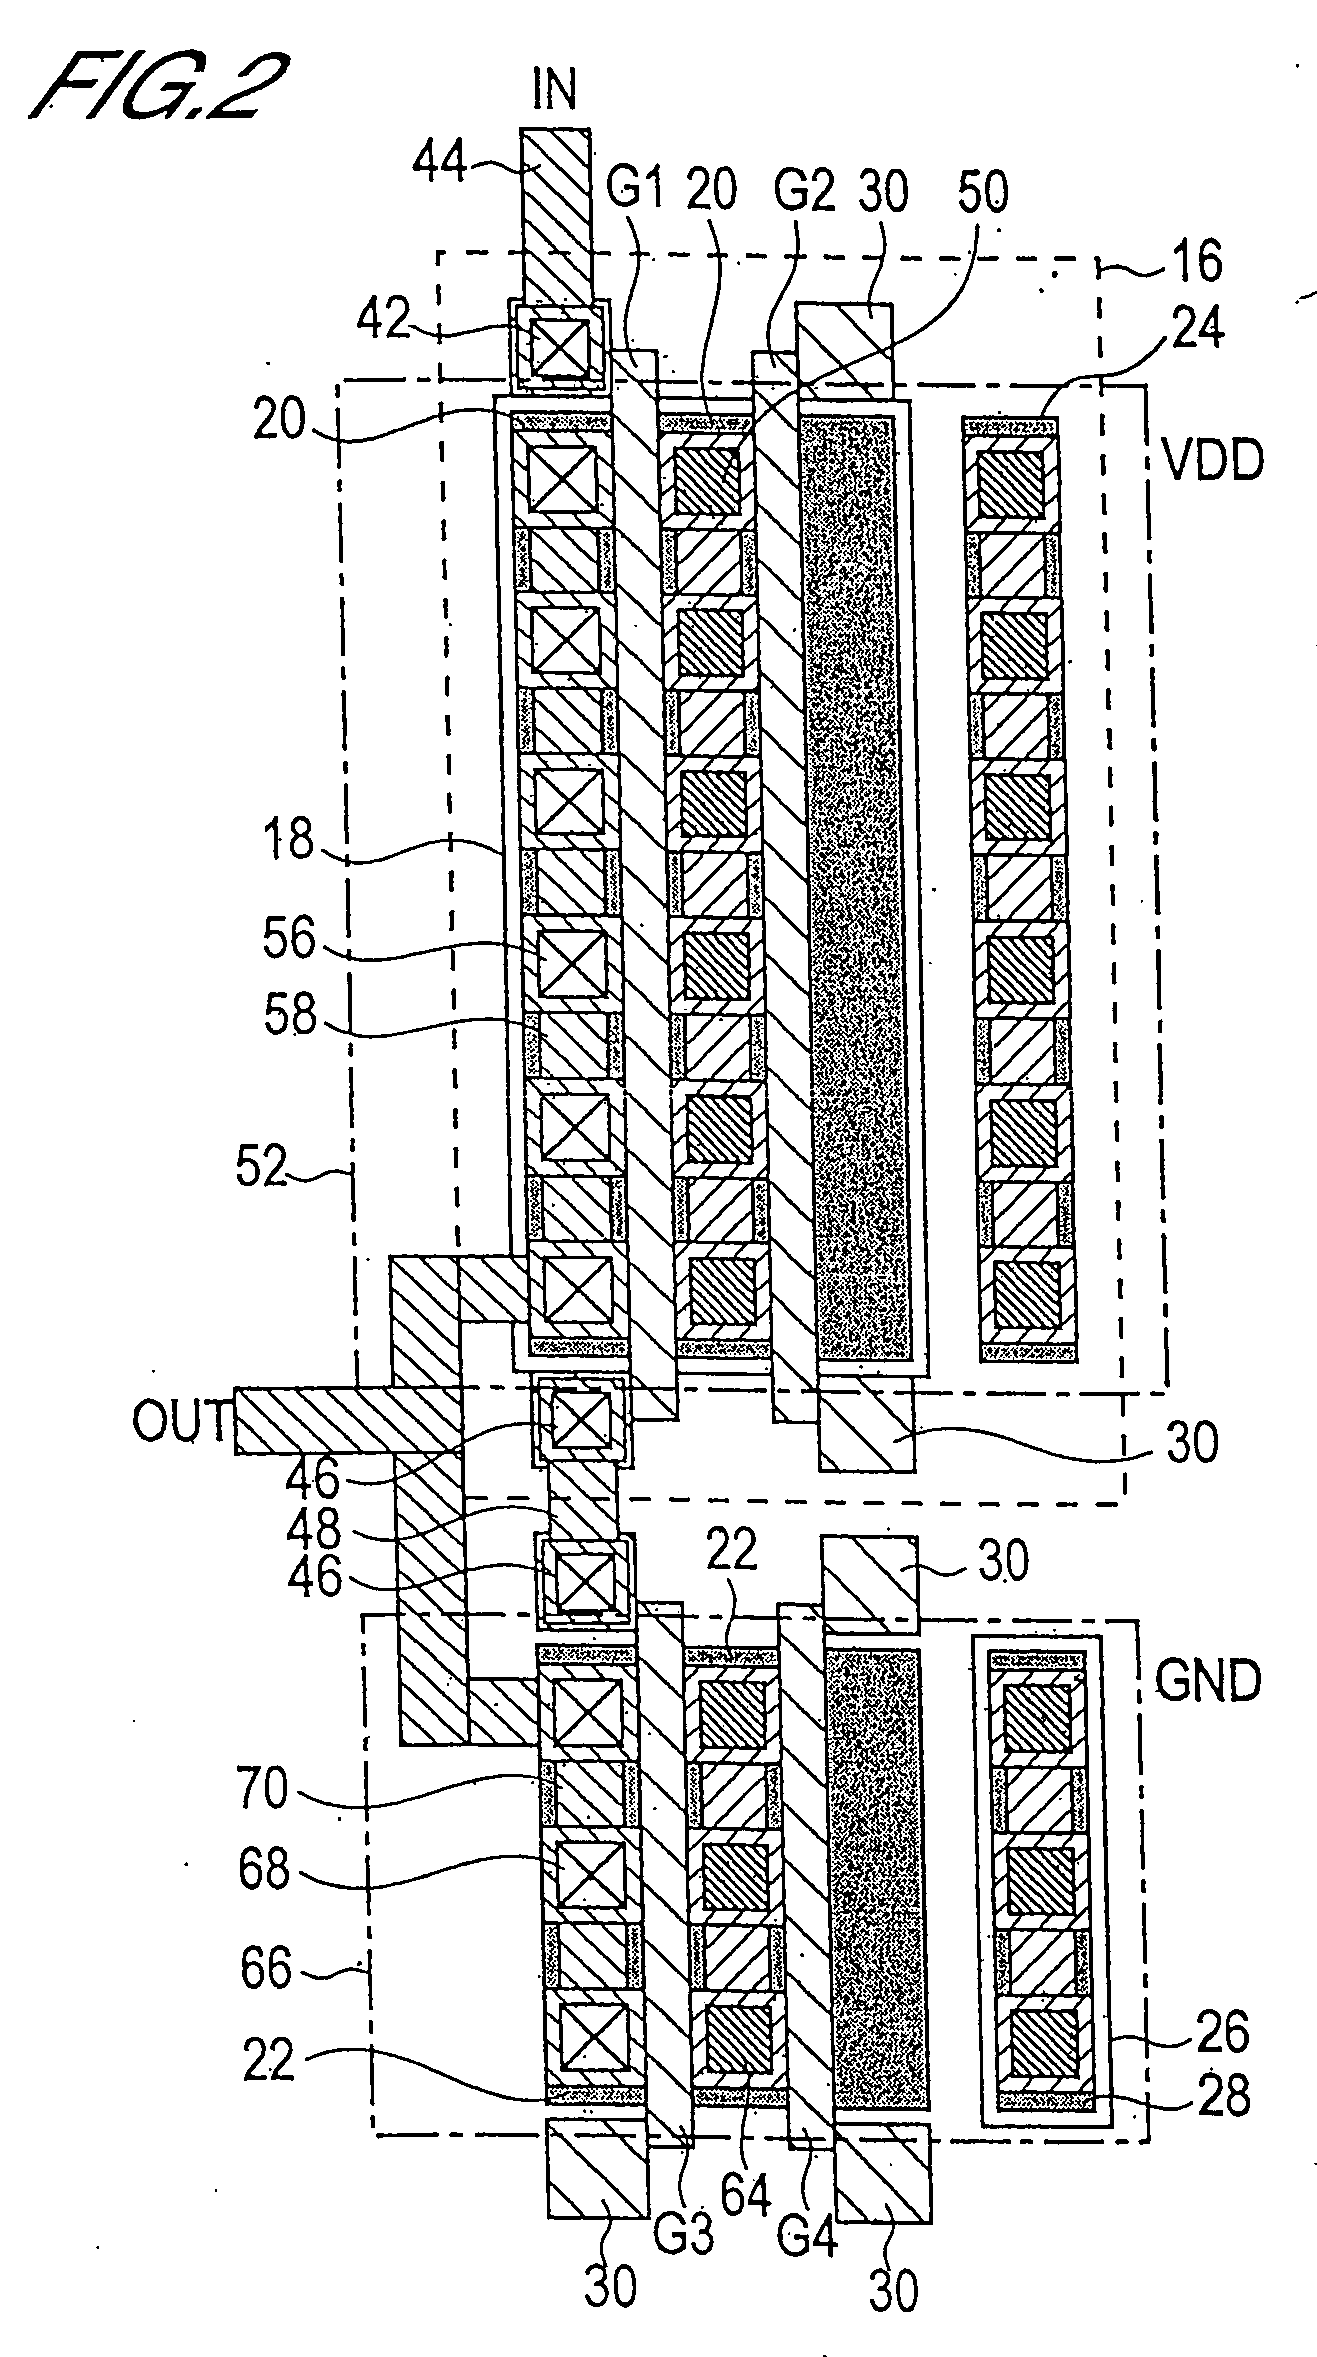 Basic cells configurable into different types of semiconductor integrated circuits